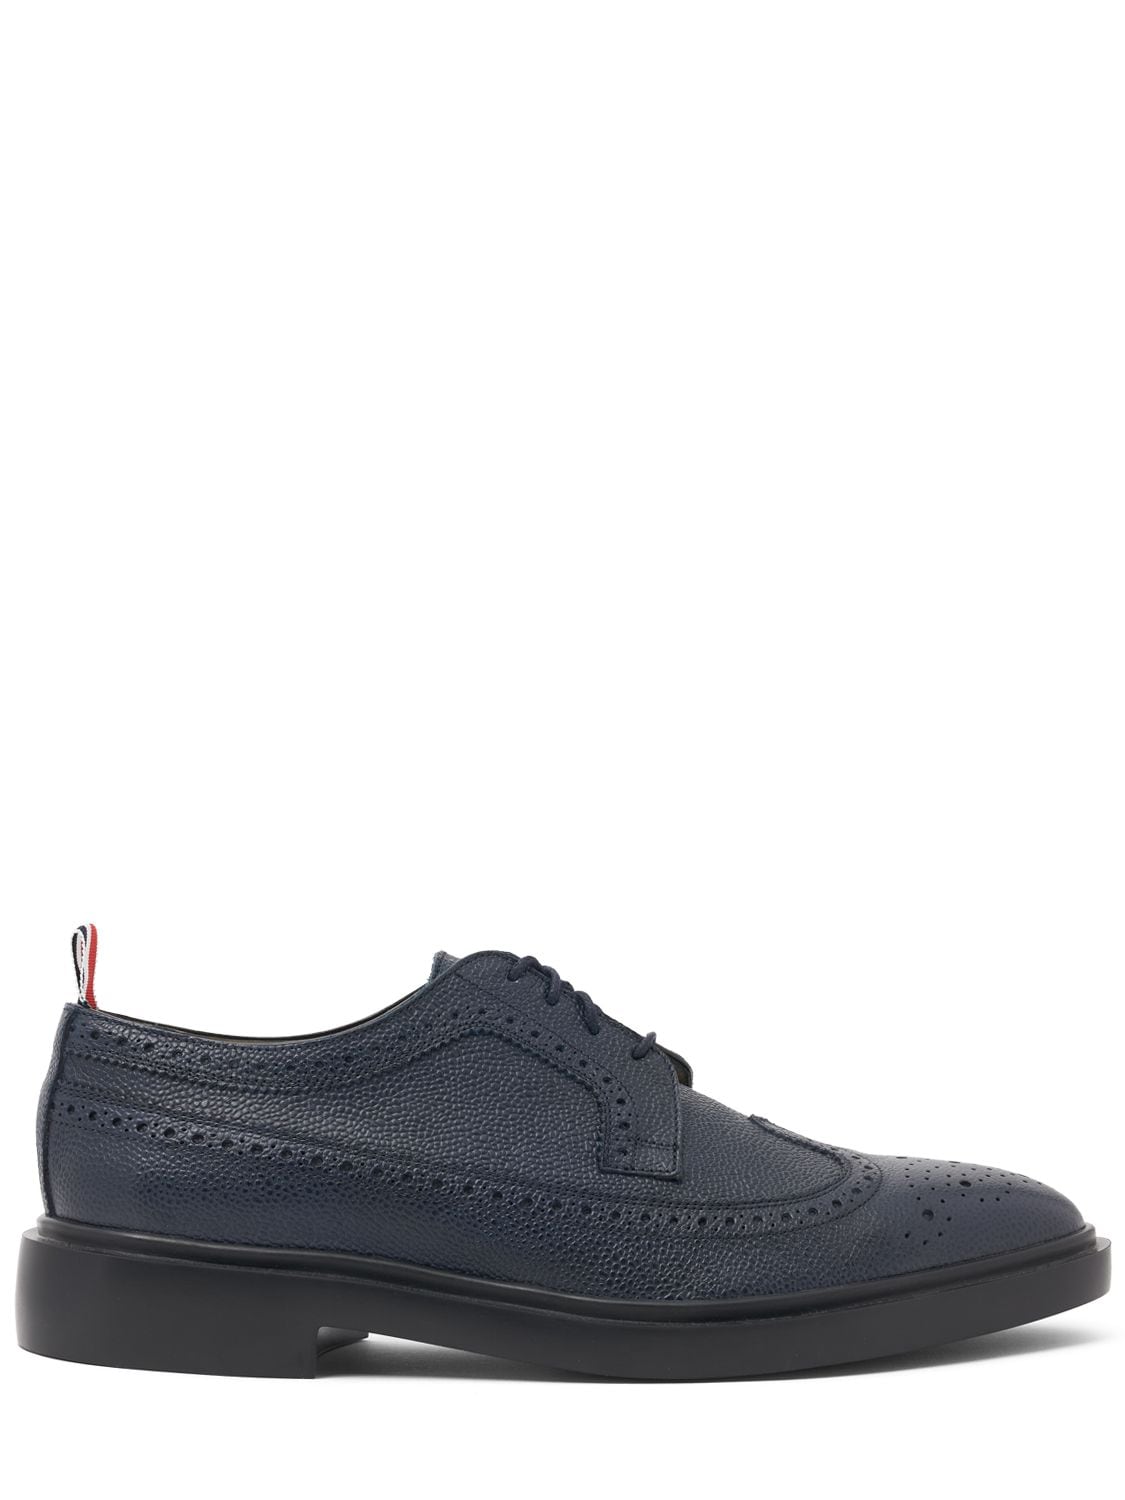 Thom Browne Classic Leather Lace-up Shoes In Navy